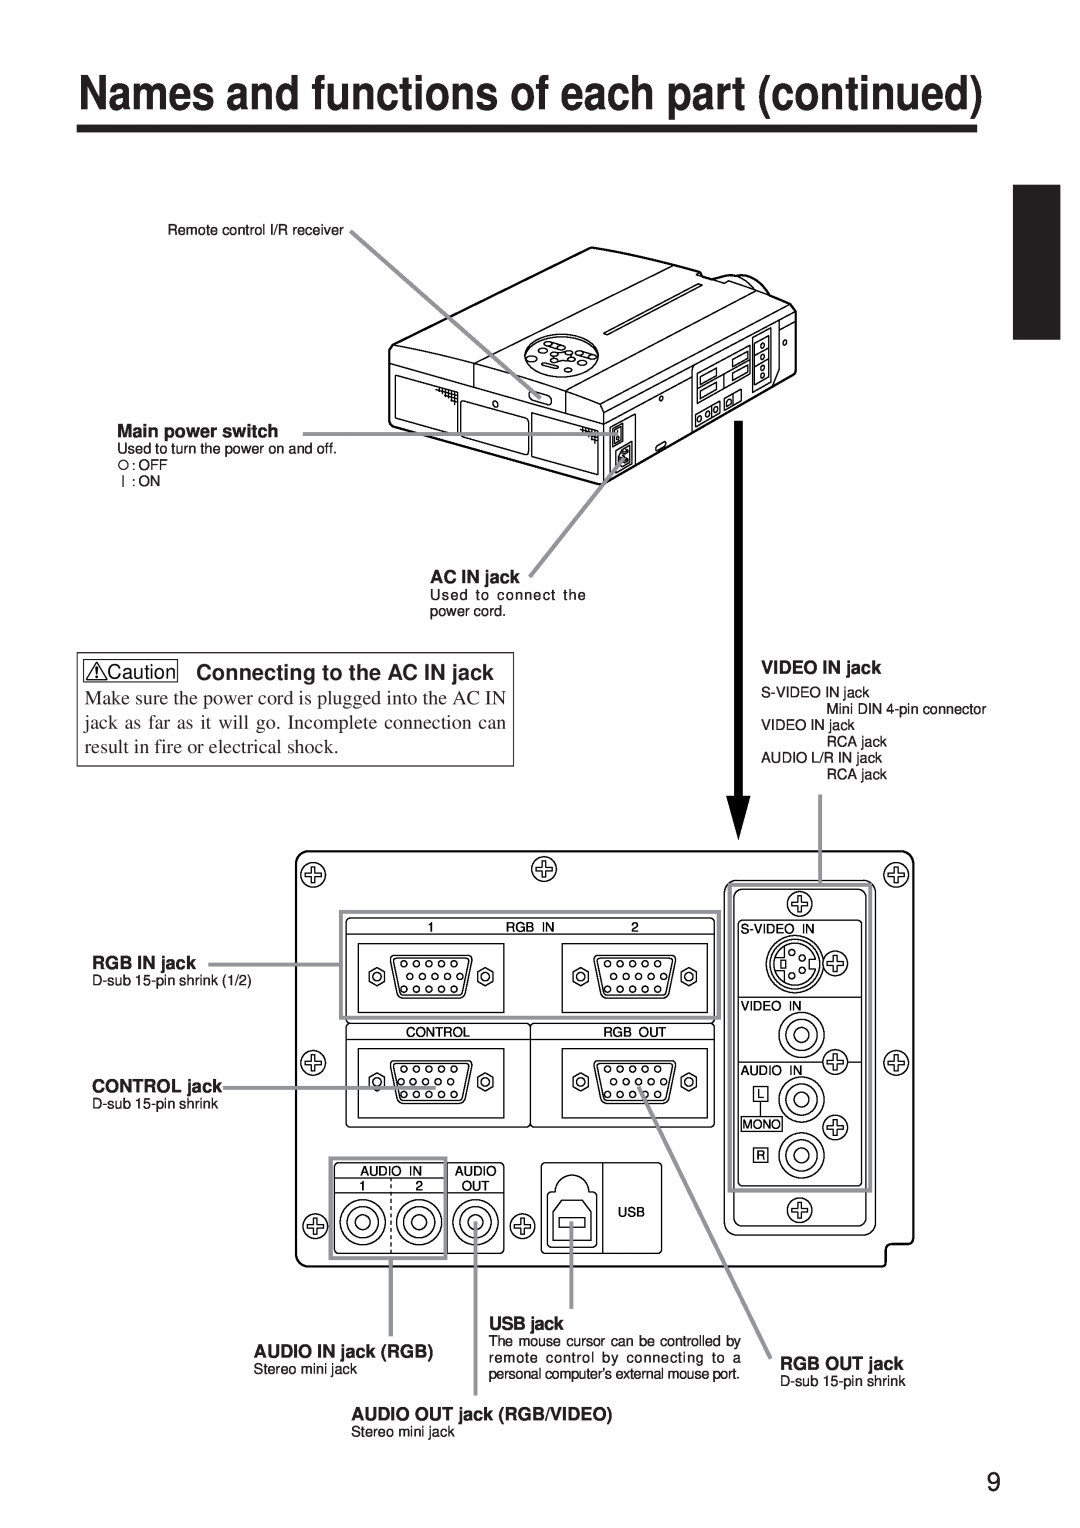 BOXLIGHT MP-650i user manual Names and functions of each part continued, Caution Connecting to the AC IN jack 